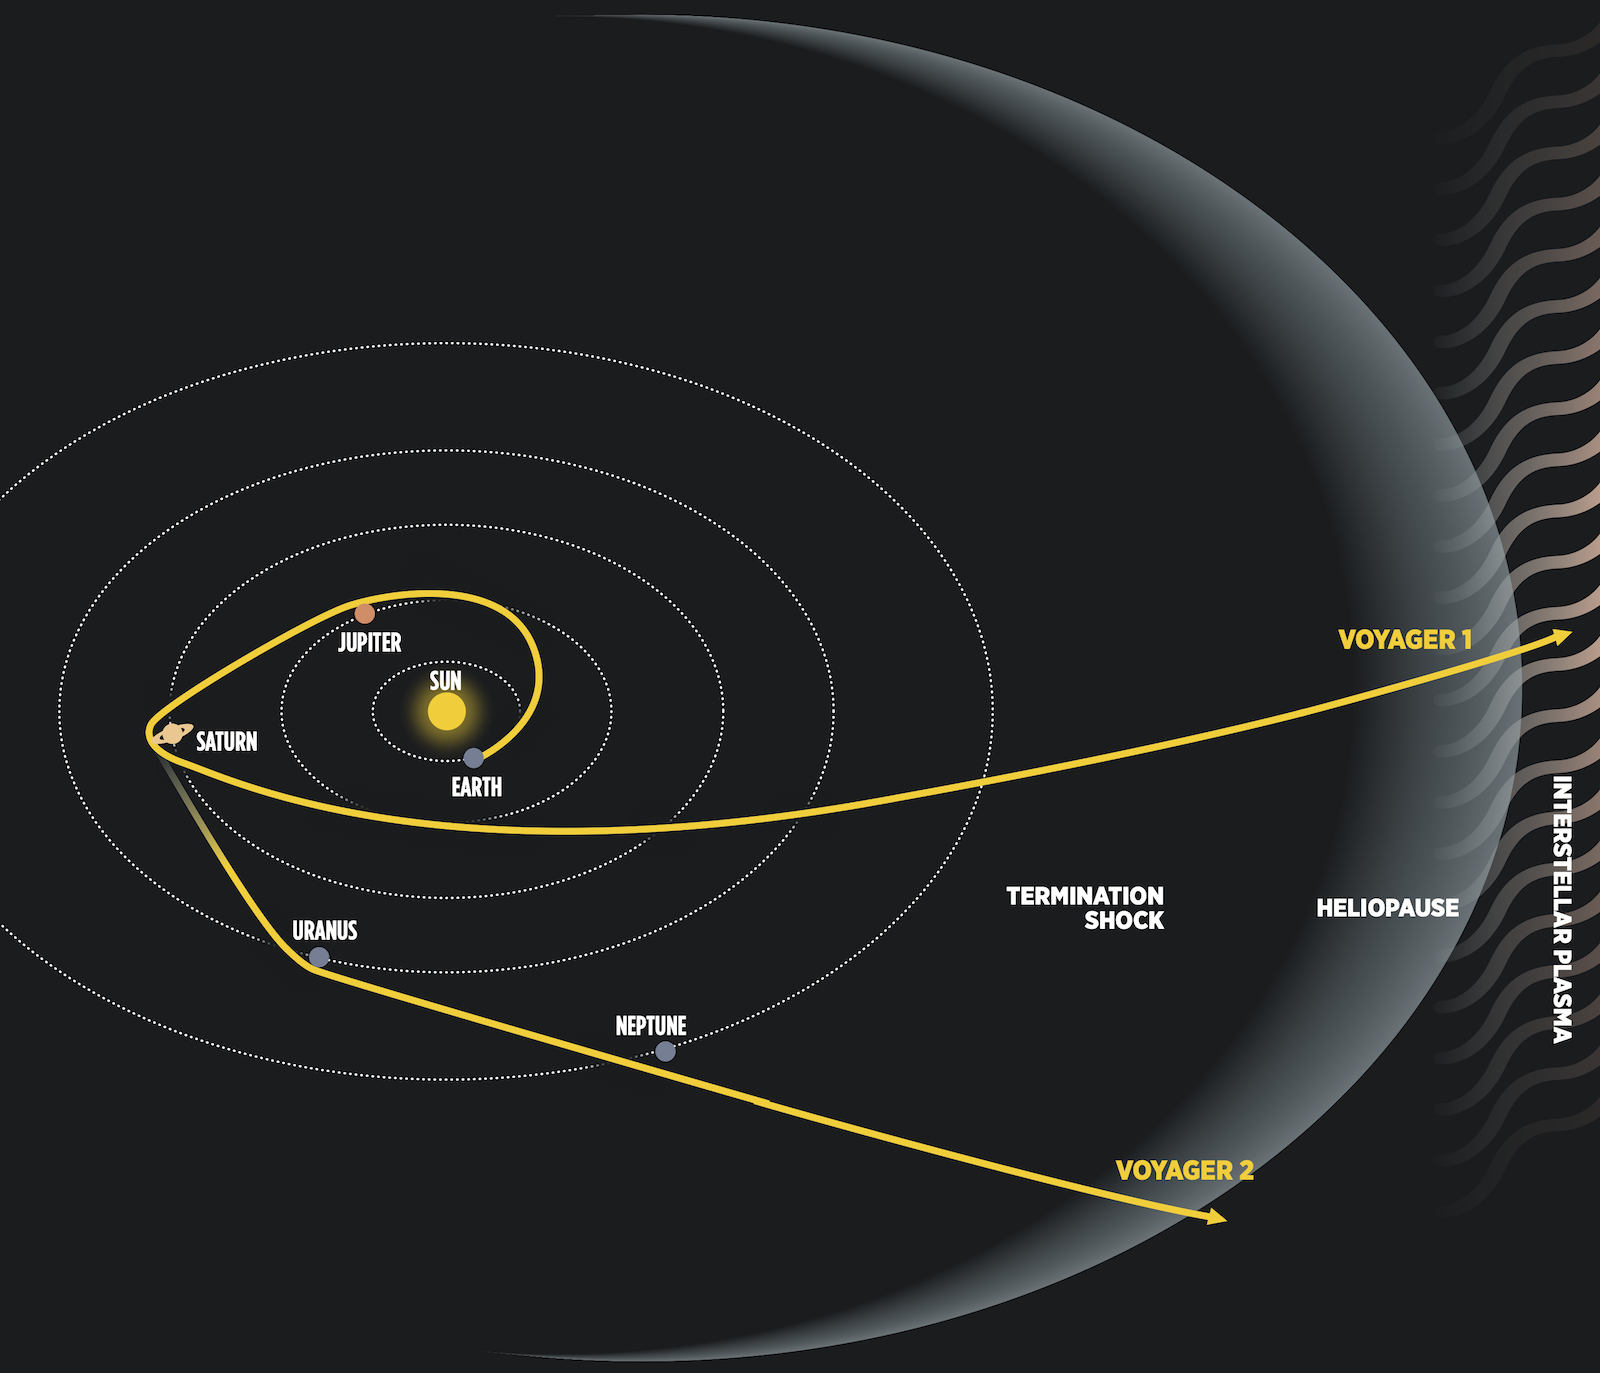 Bon Voyager: Both spacecraft have left the Solar System | The Spokesman-Review